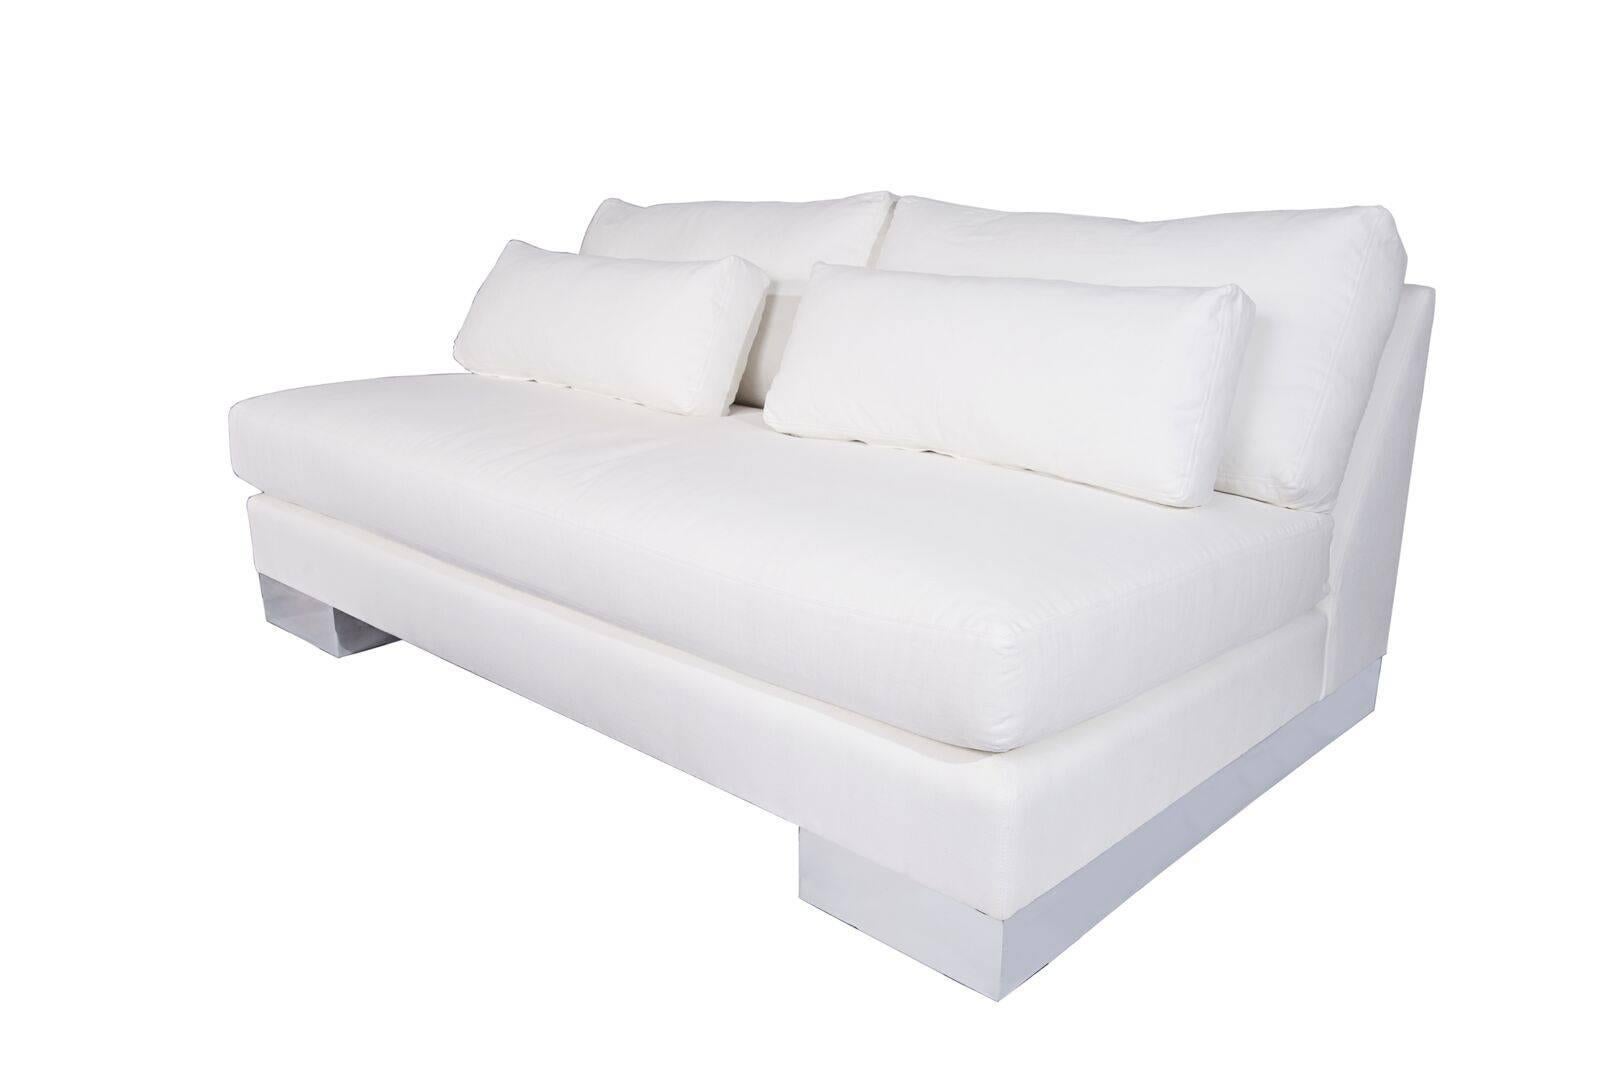 Beautiful MD10 sofa
with polished stainless steel legs
Fabric: Caleido / Color: 10995.